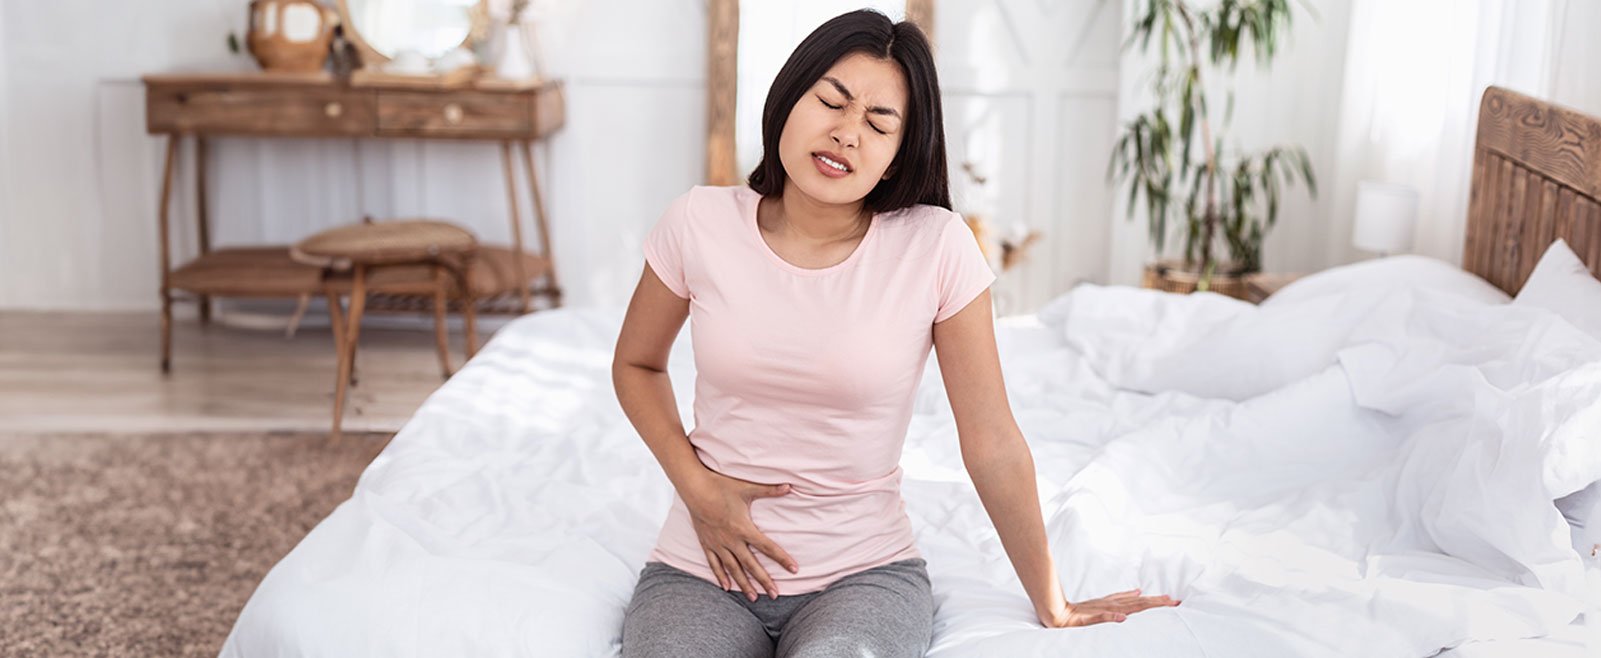 Woman sits on bed feeling pelvic pain and abdominal pain.